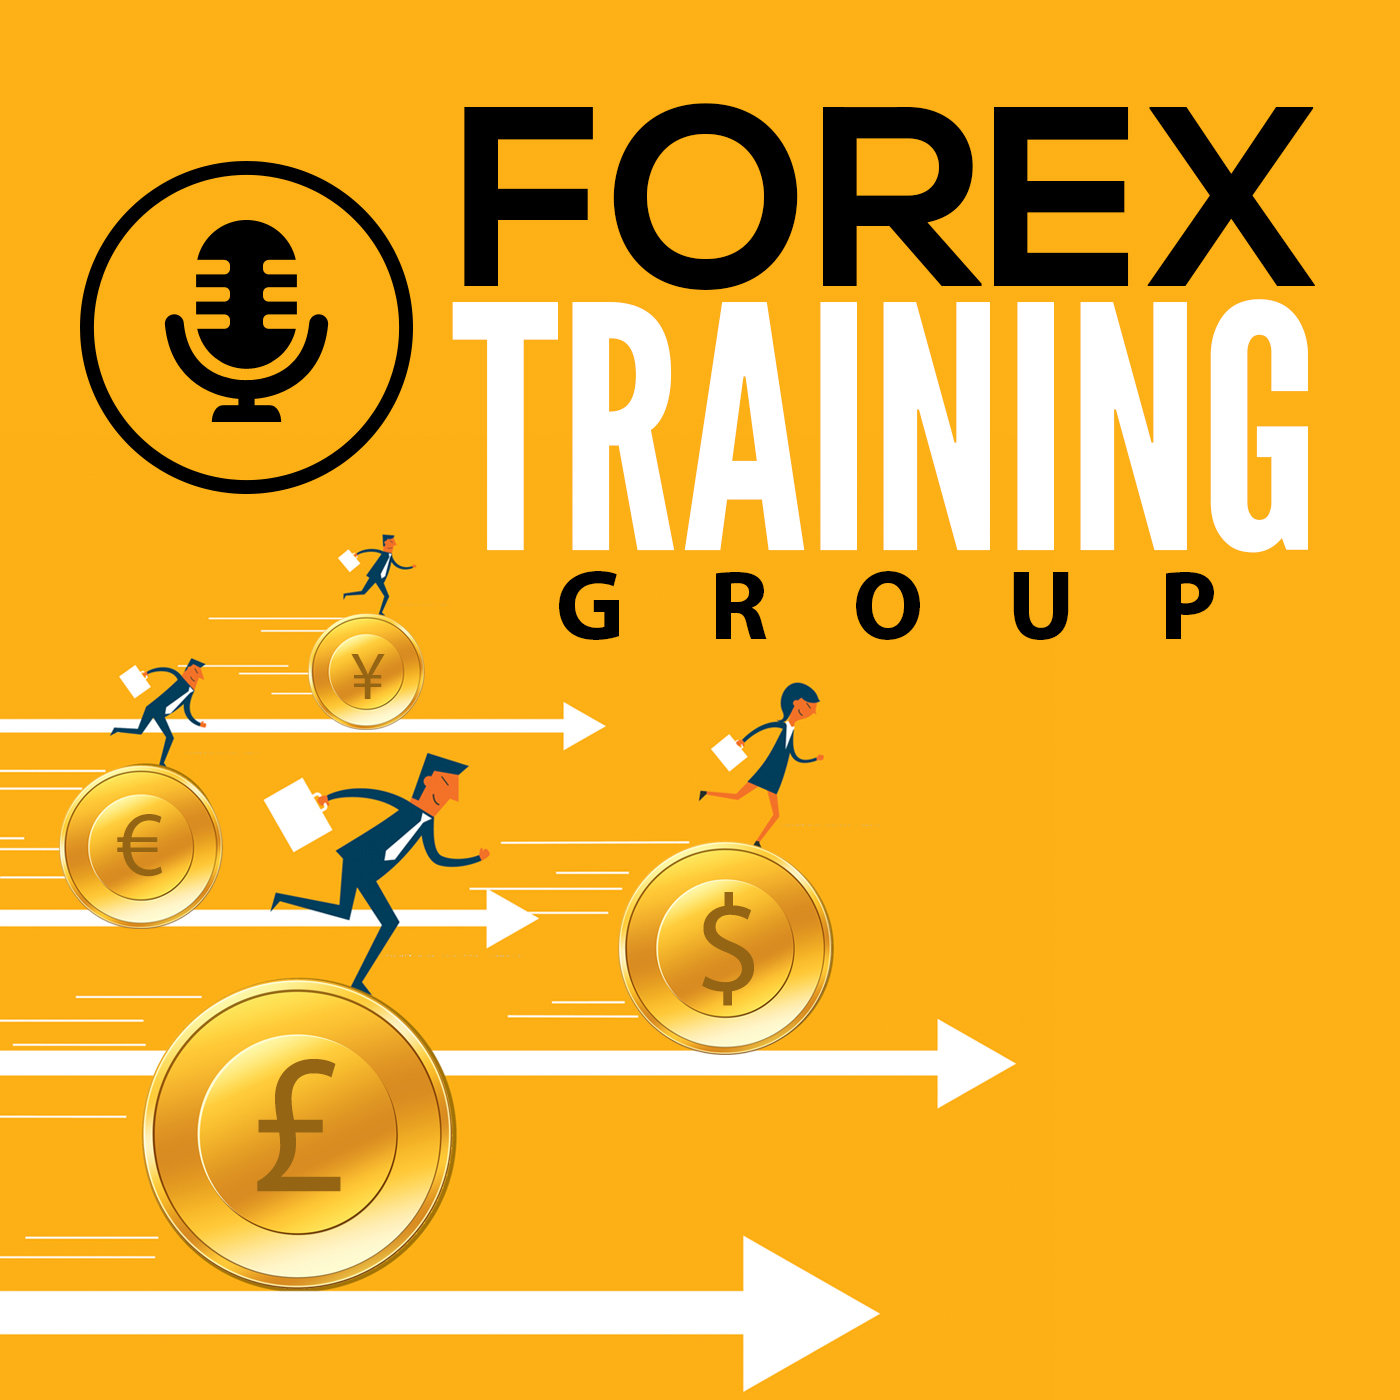 Top 10 Forex Trading Tips That Will Make You A Better ...